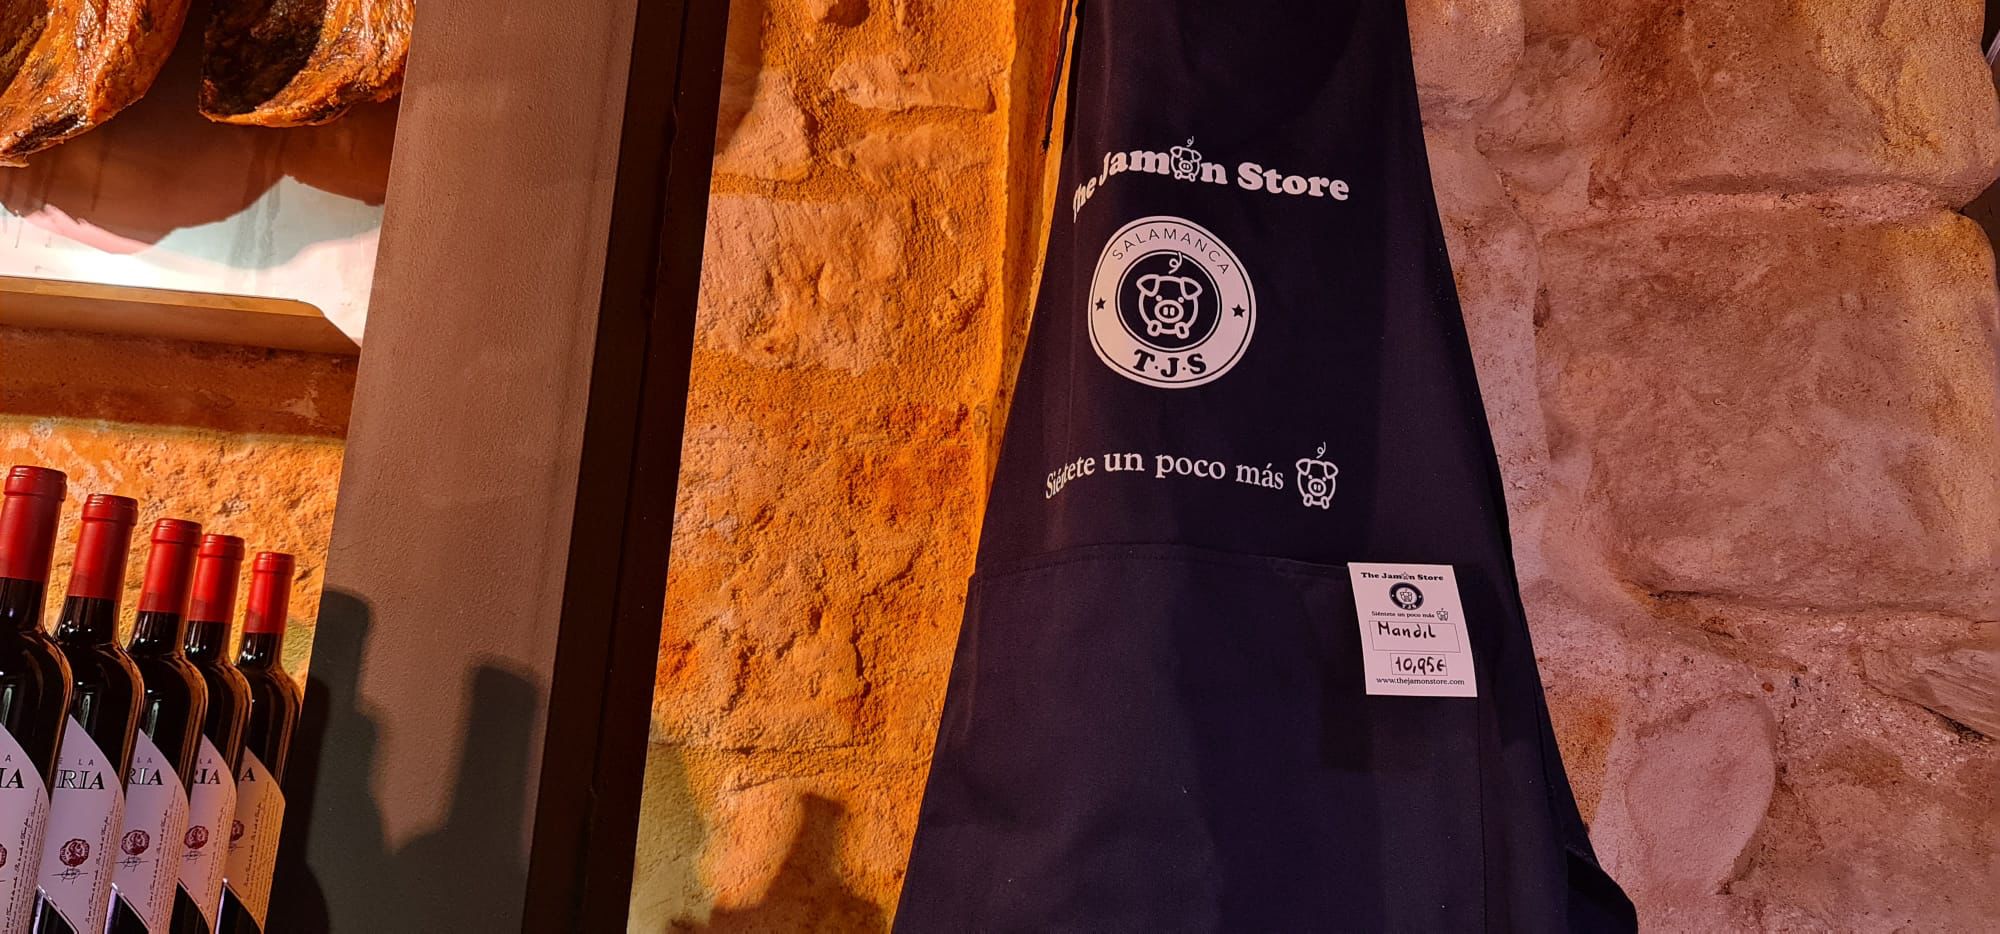 The Jamón Store (20)